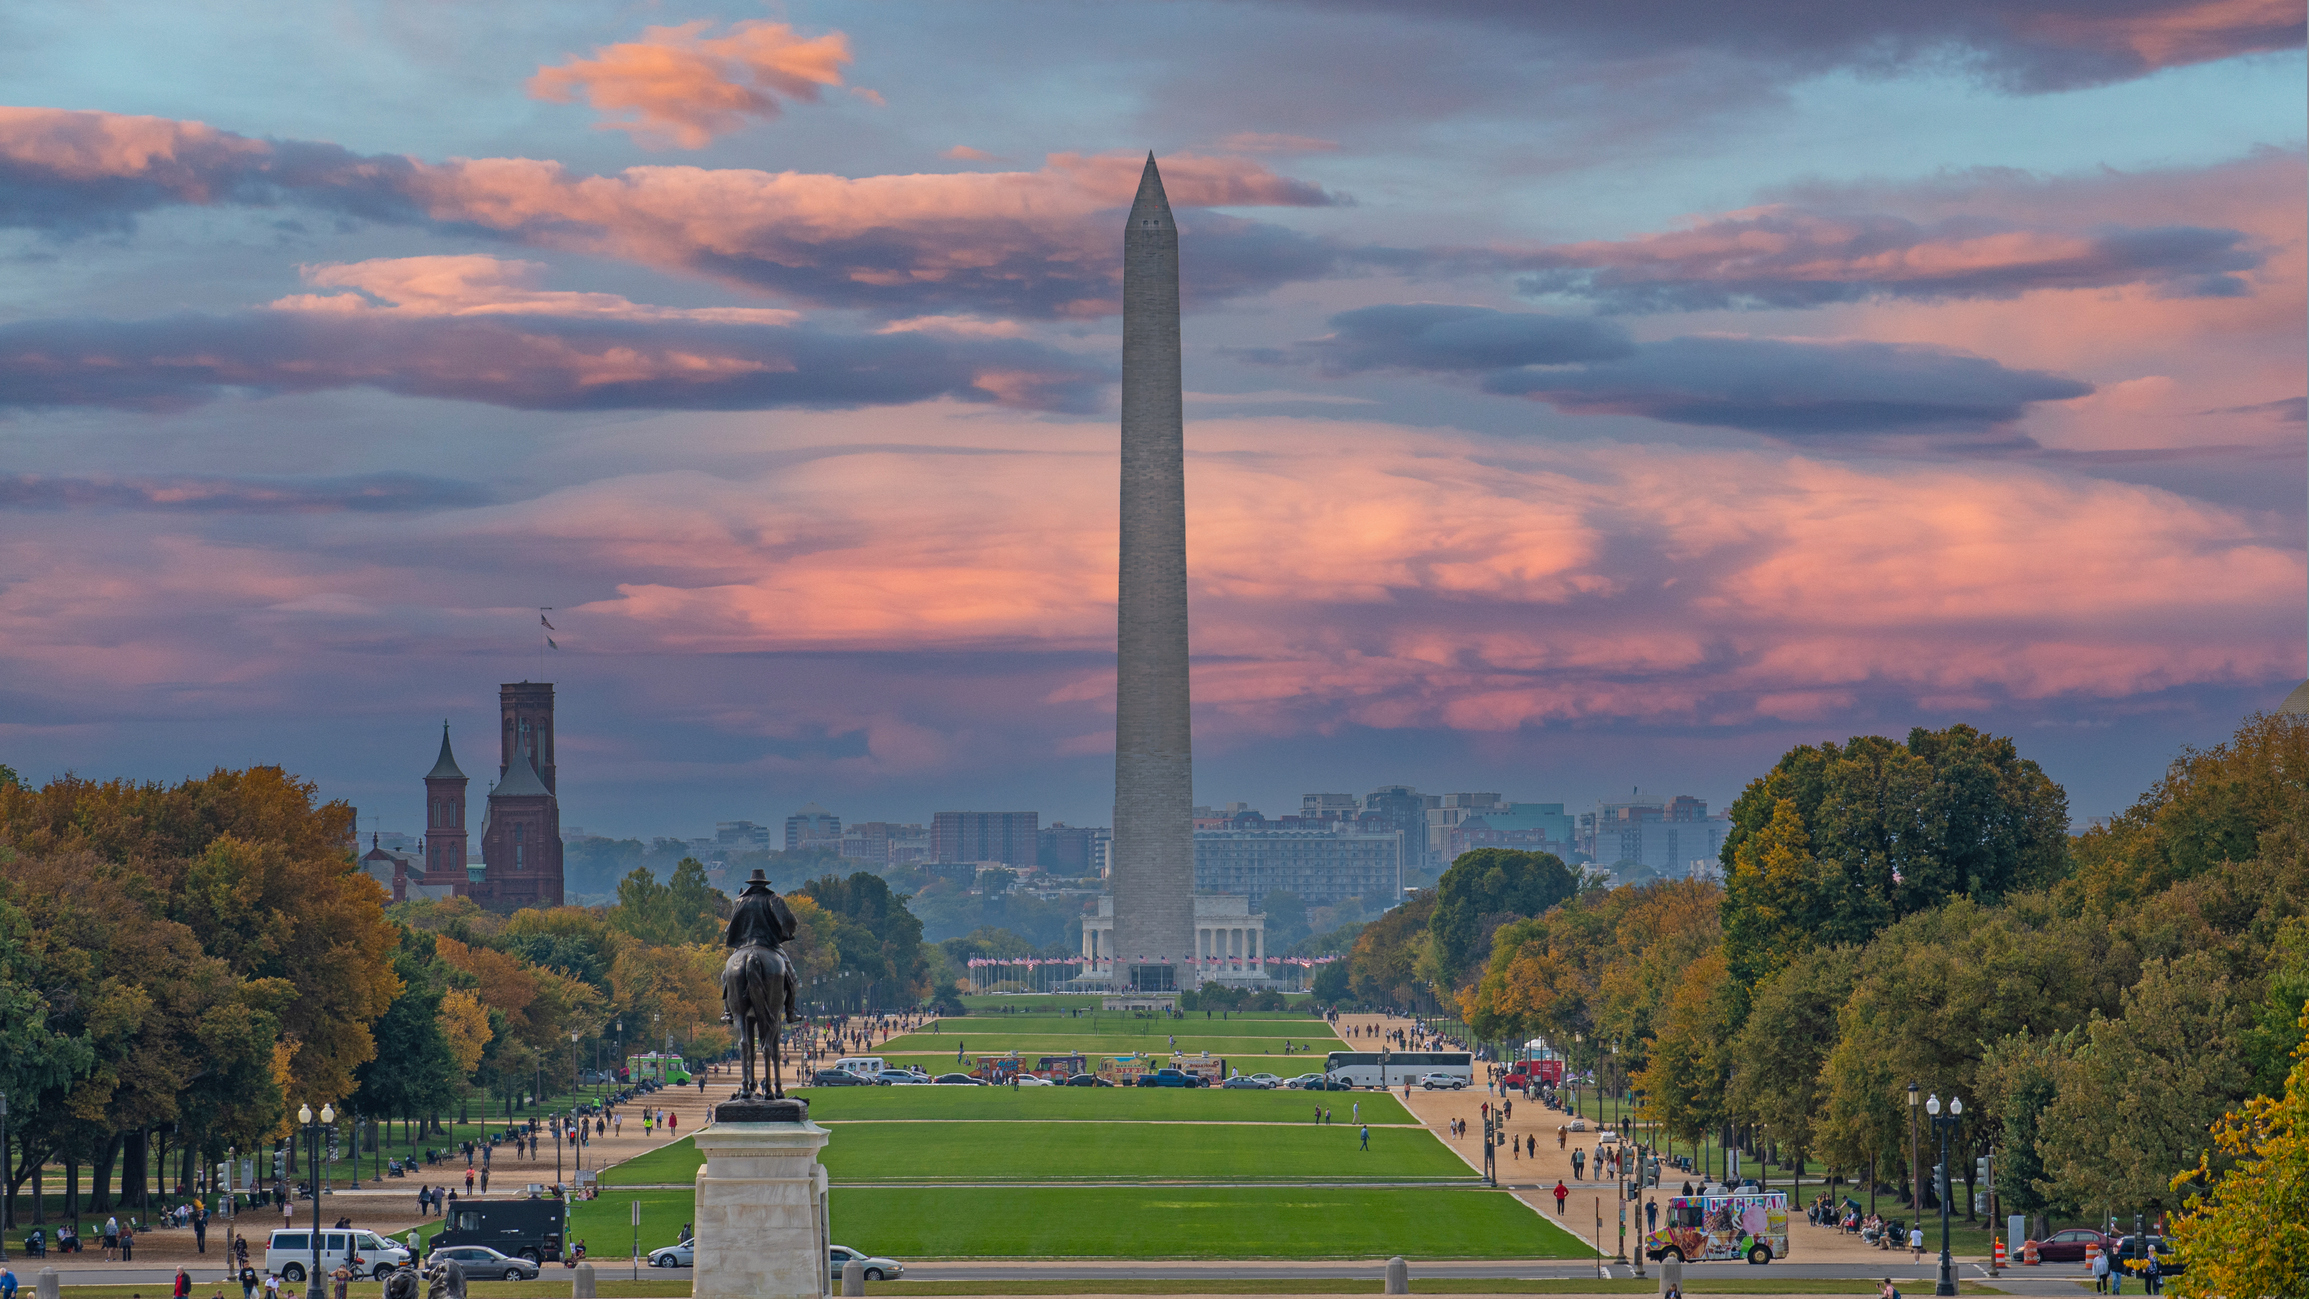 Washington Monument seen from the National Mall at dusk with clear skies and surrounding landscape